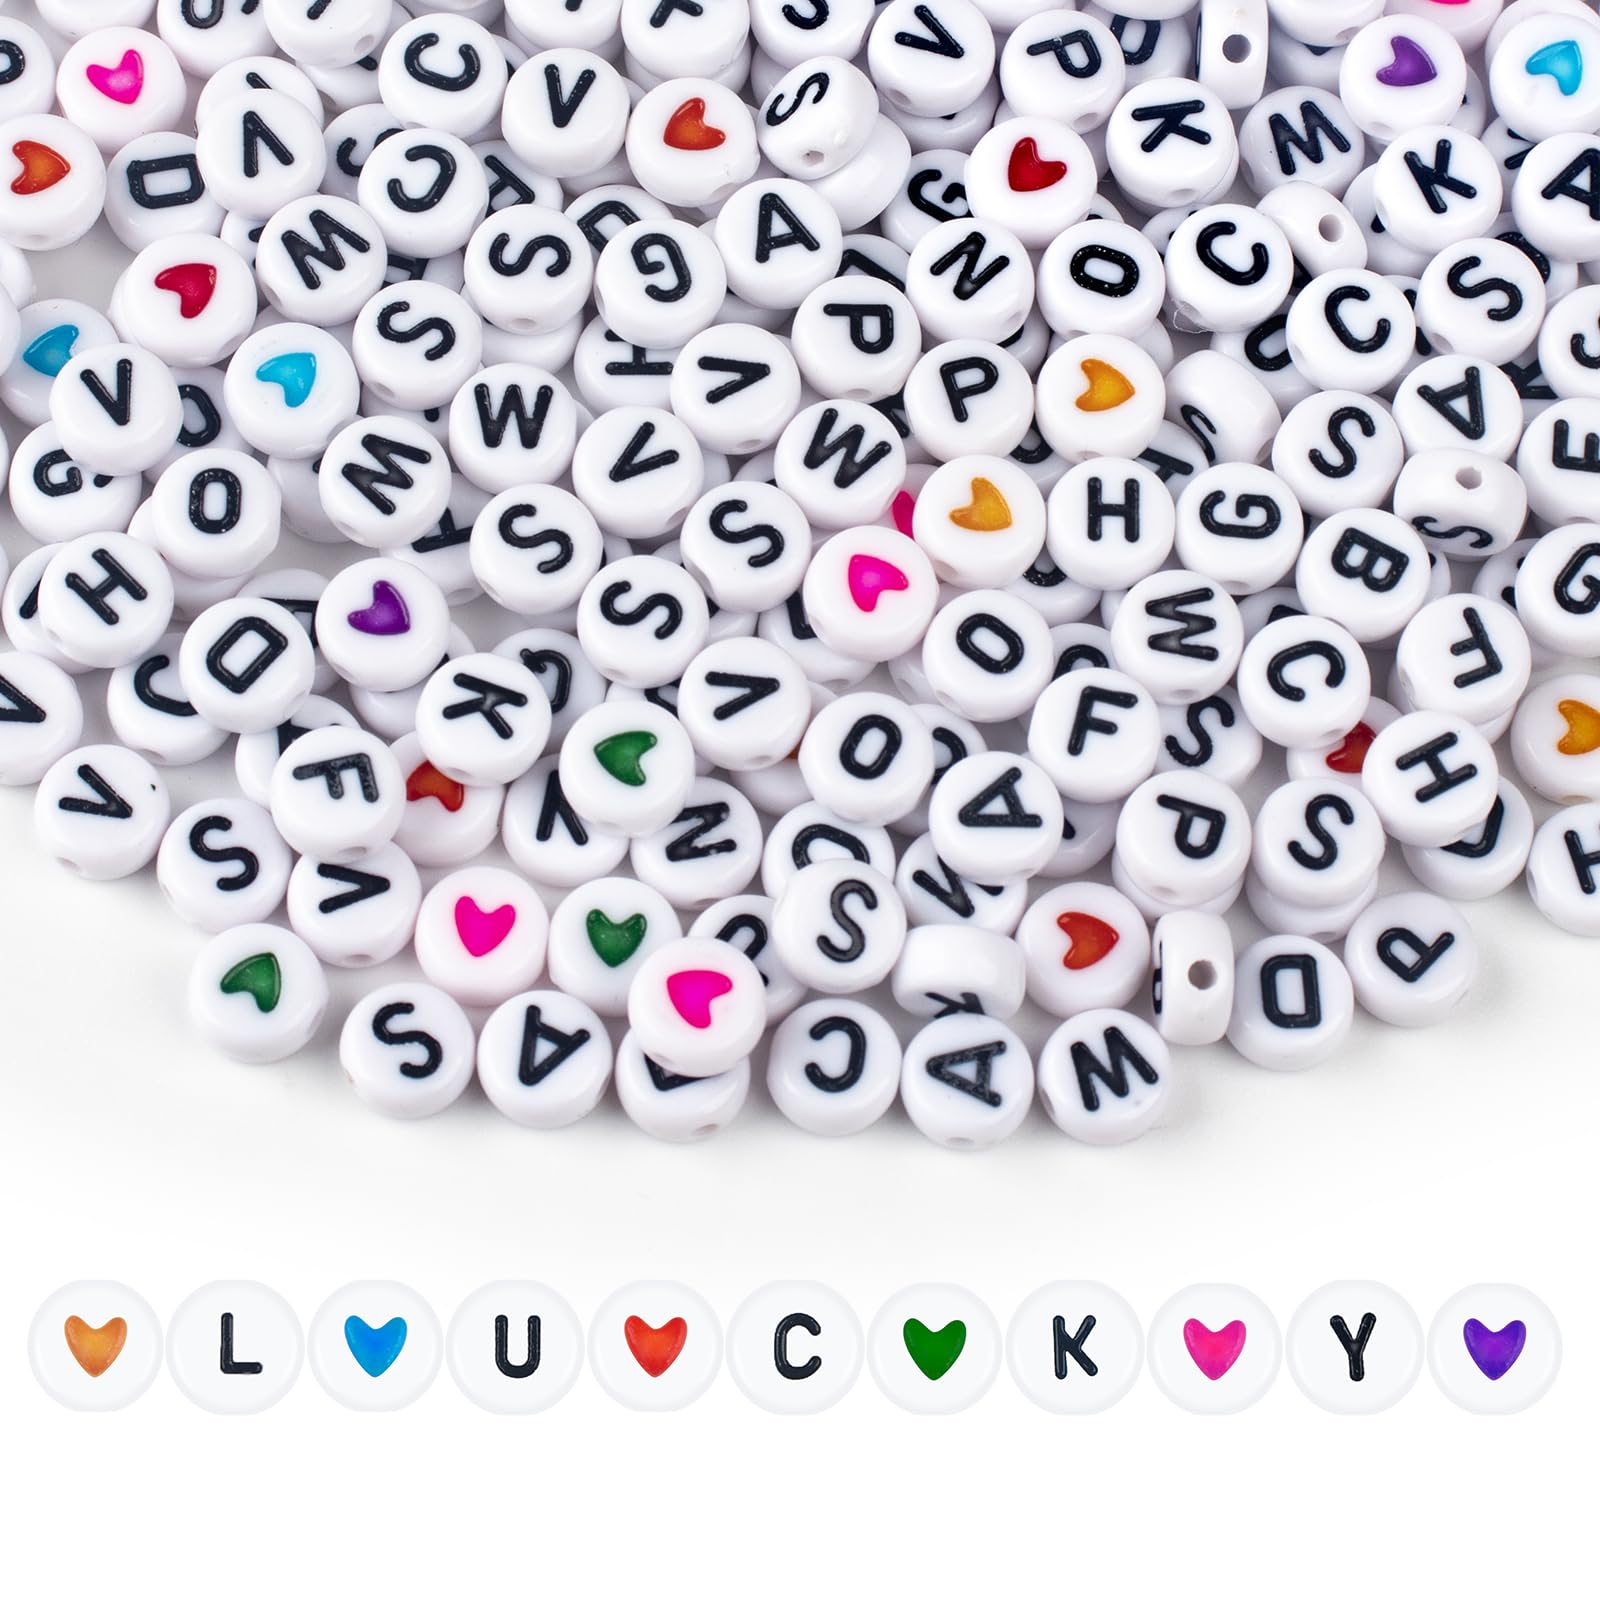 SUTOUG 1000PCS Colourful Letter Beads for Threading, 4 x 7 MM, A-Z White Letter Beads and Colourful Heart Beads, Acrylic Round Beads for Jewellery DIY Making Crafts Bracelets Necklaces Ornaments Penda